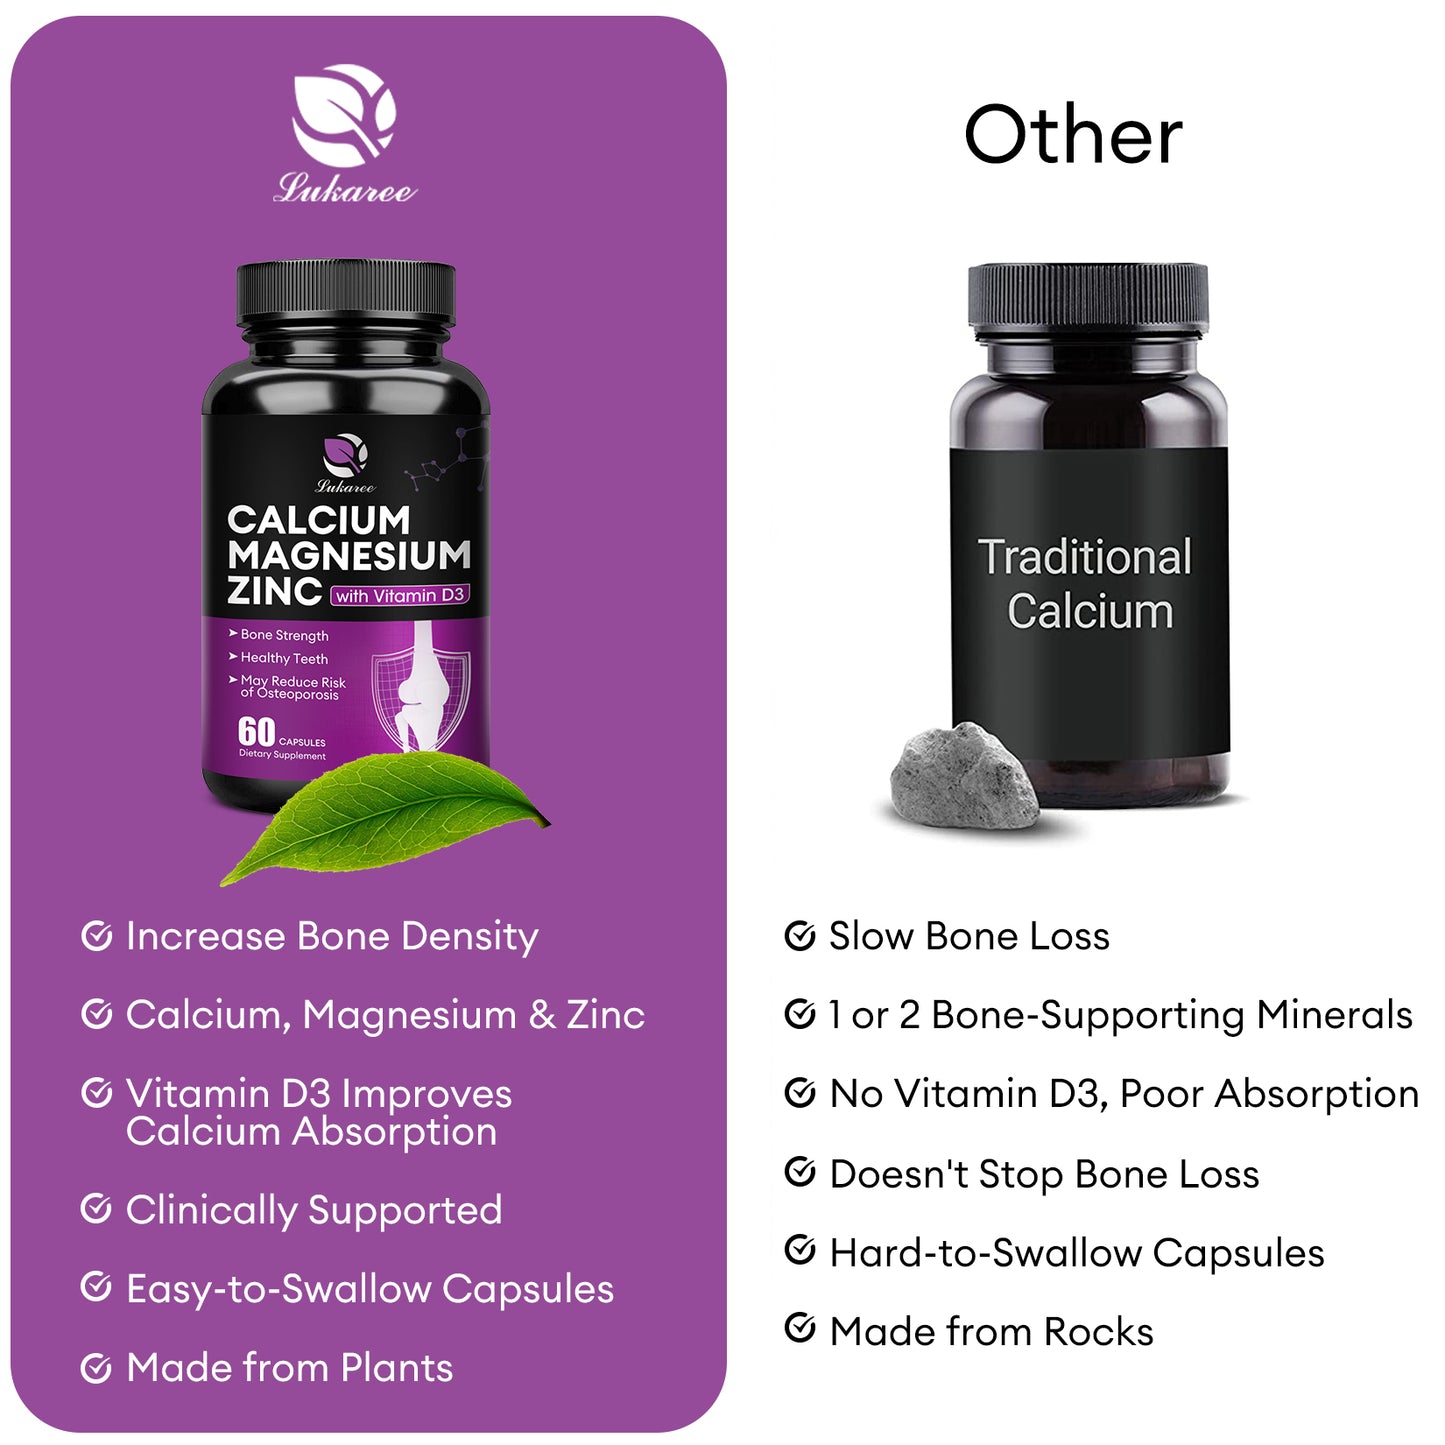 Calcium Magnesium Zinc with Vitamin D3 Supplement, Promotes Healthy Bones and Teeth - Supports Nerve & Muscle Function, Easy to Swallow Capsules, 60 Servings, 120 VegCaps